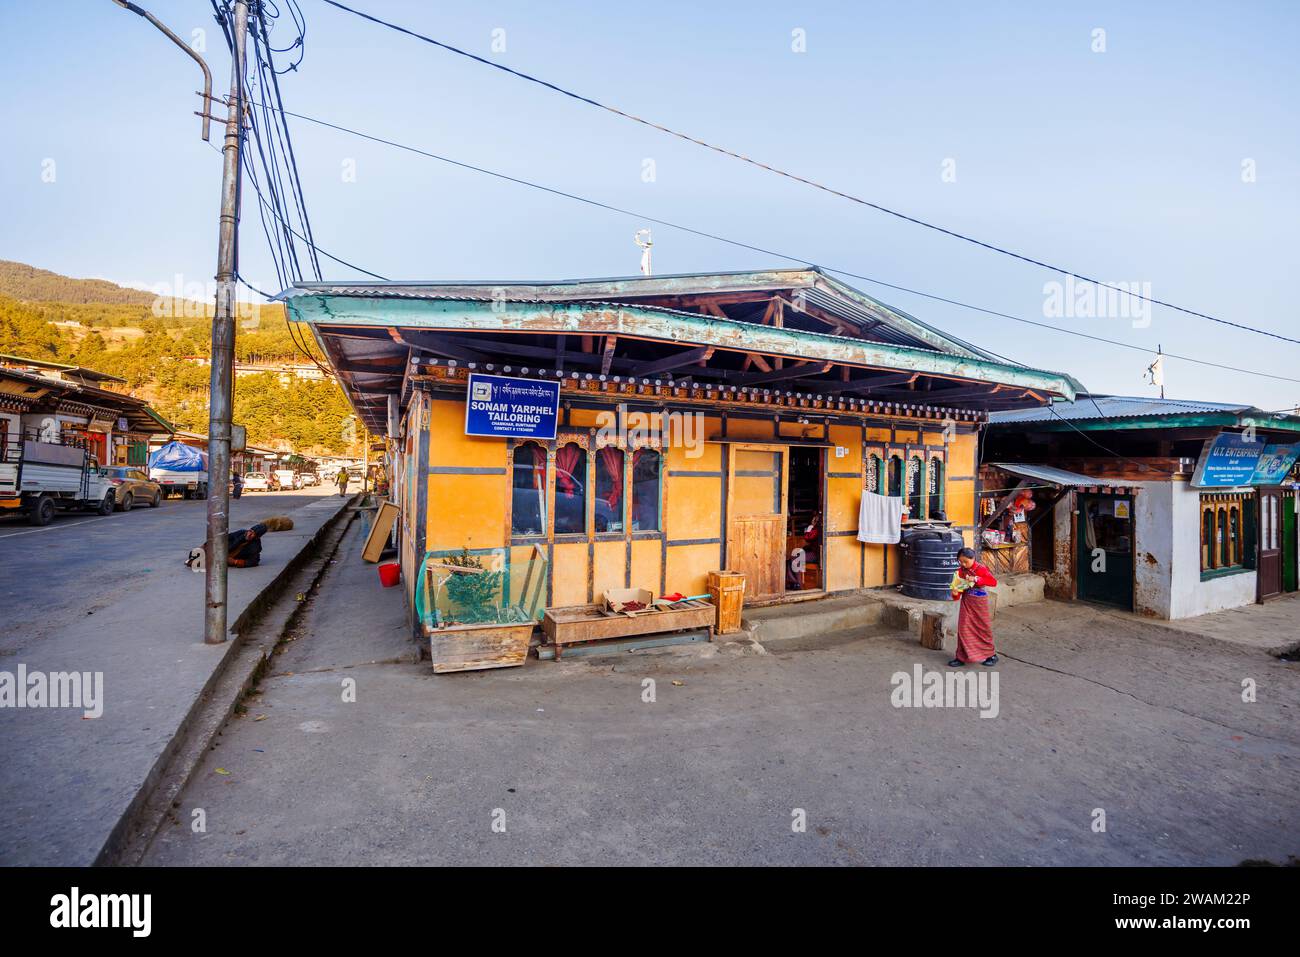 Typical local shops in Local shops in Chamkhar Town, Bumthang, in the central-eastern region of Bhutan Stock Photo